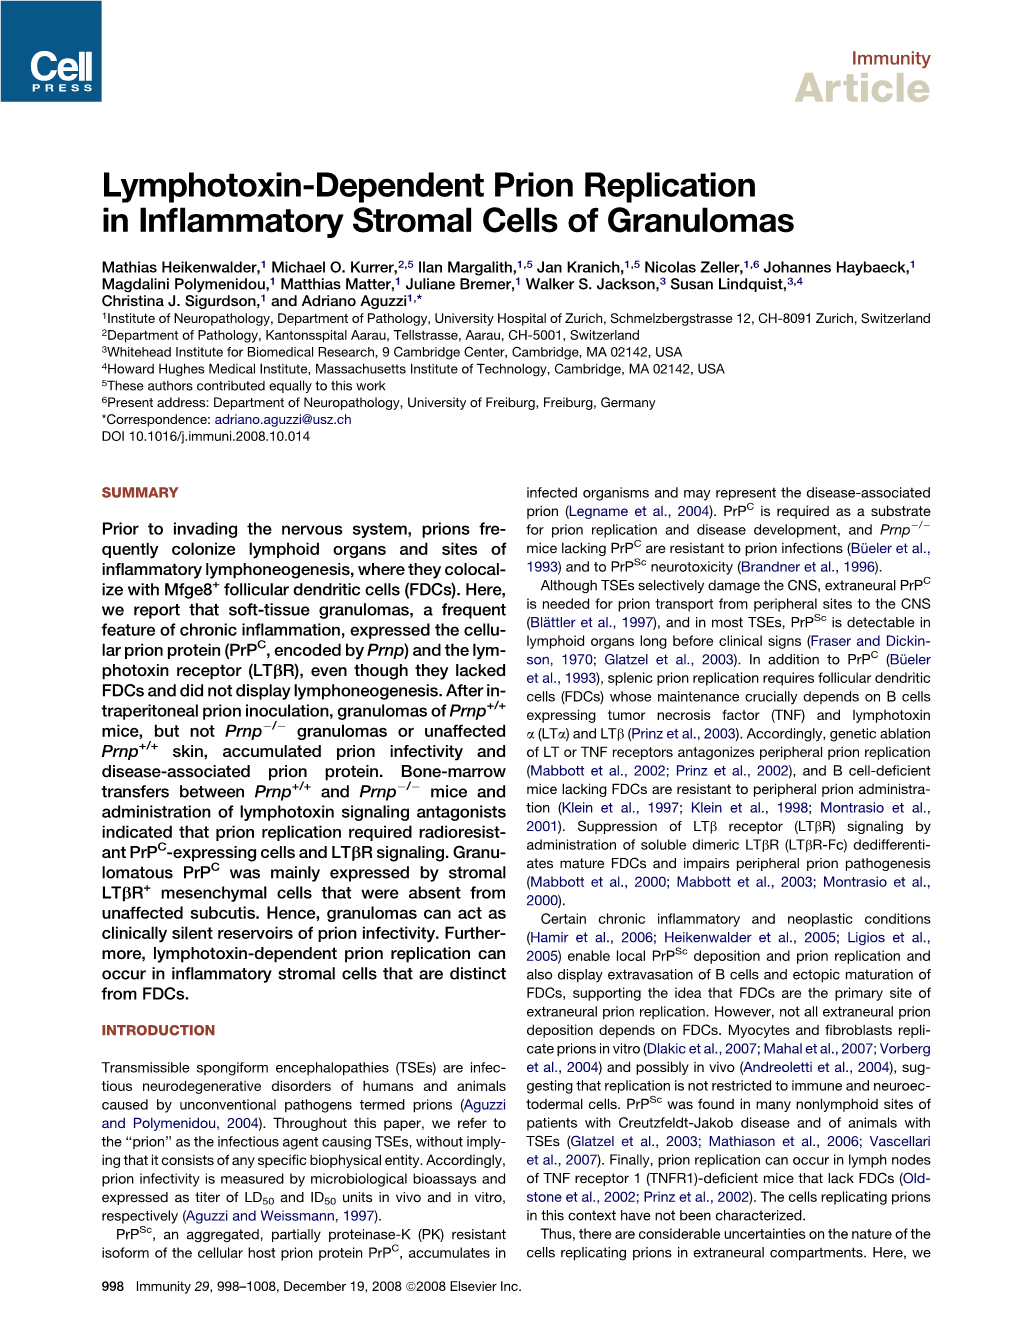 Lymphotoxin-Dependent Prion Replication in Inflammatory Stromal Cells of Granulomas